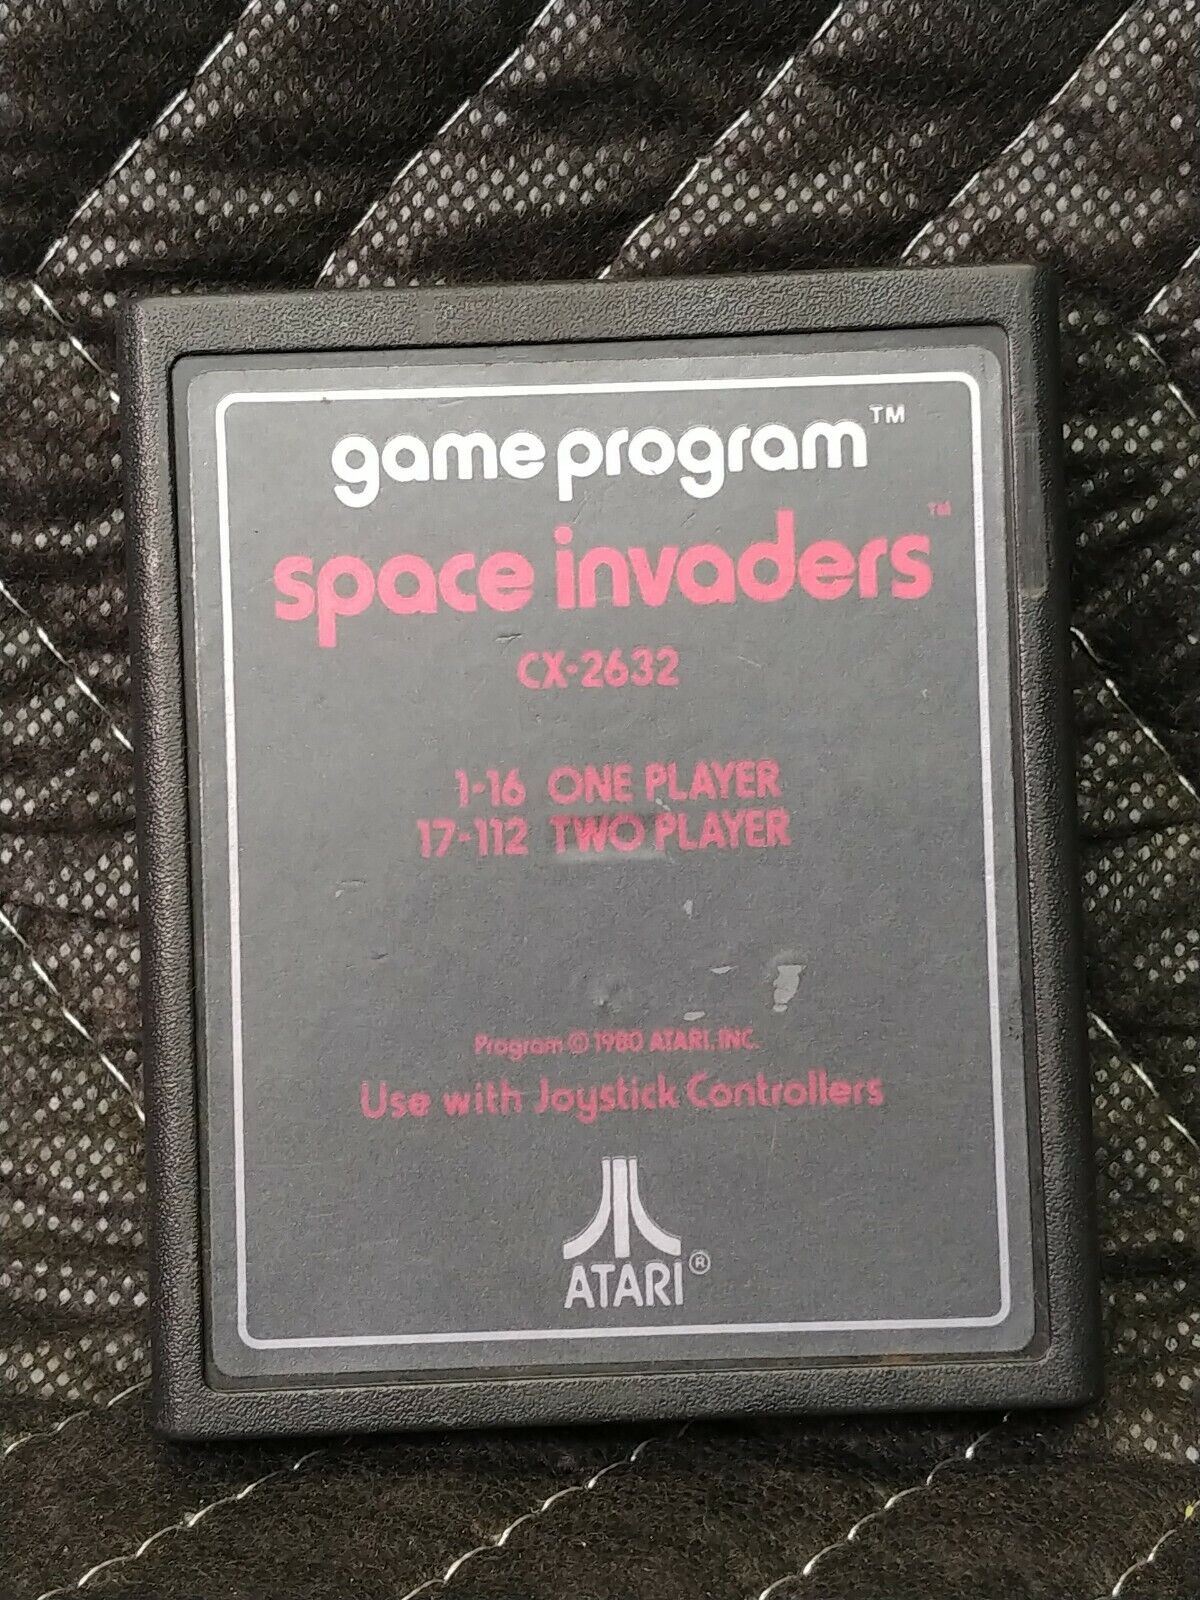 Space Invaders Atari 2600 CX 2632 Letter Game